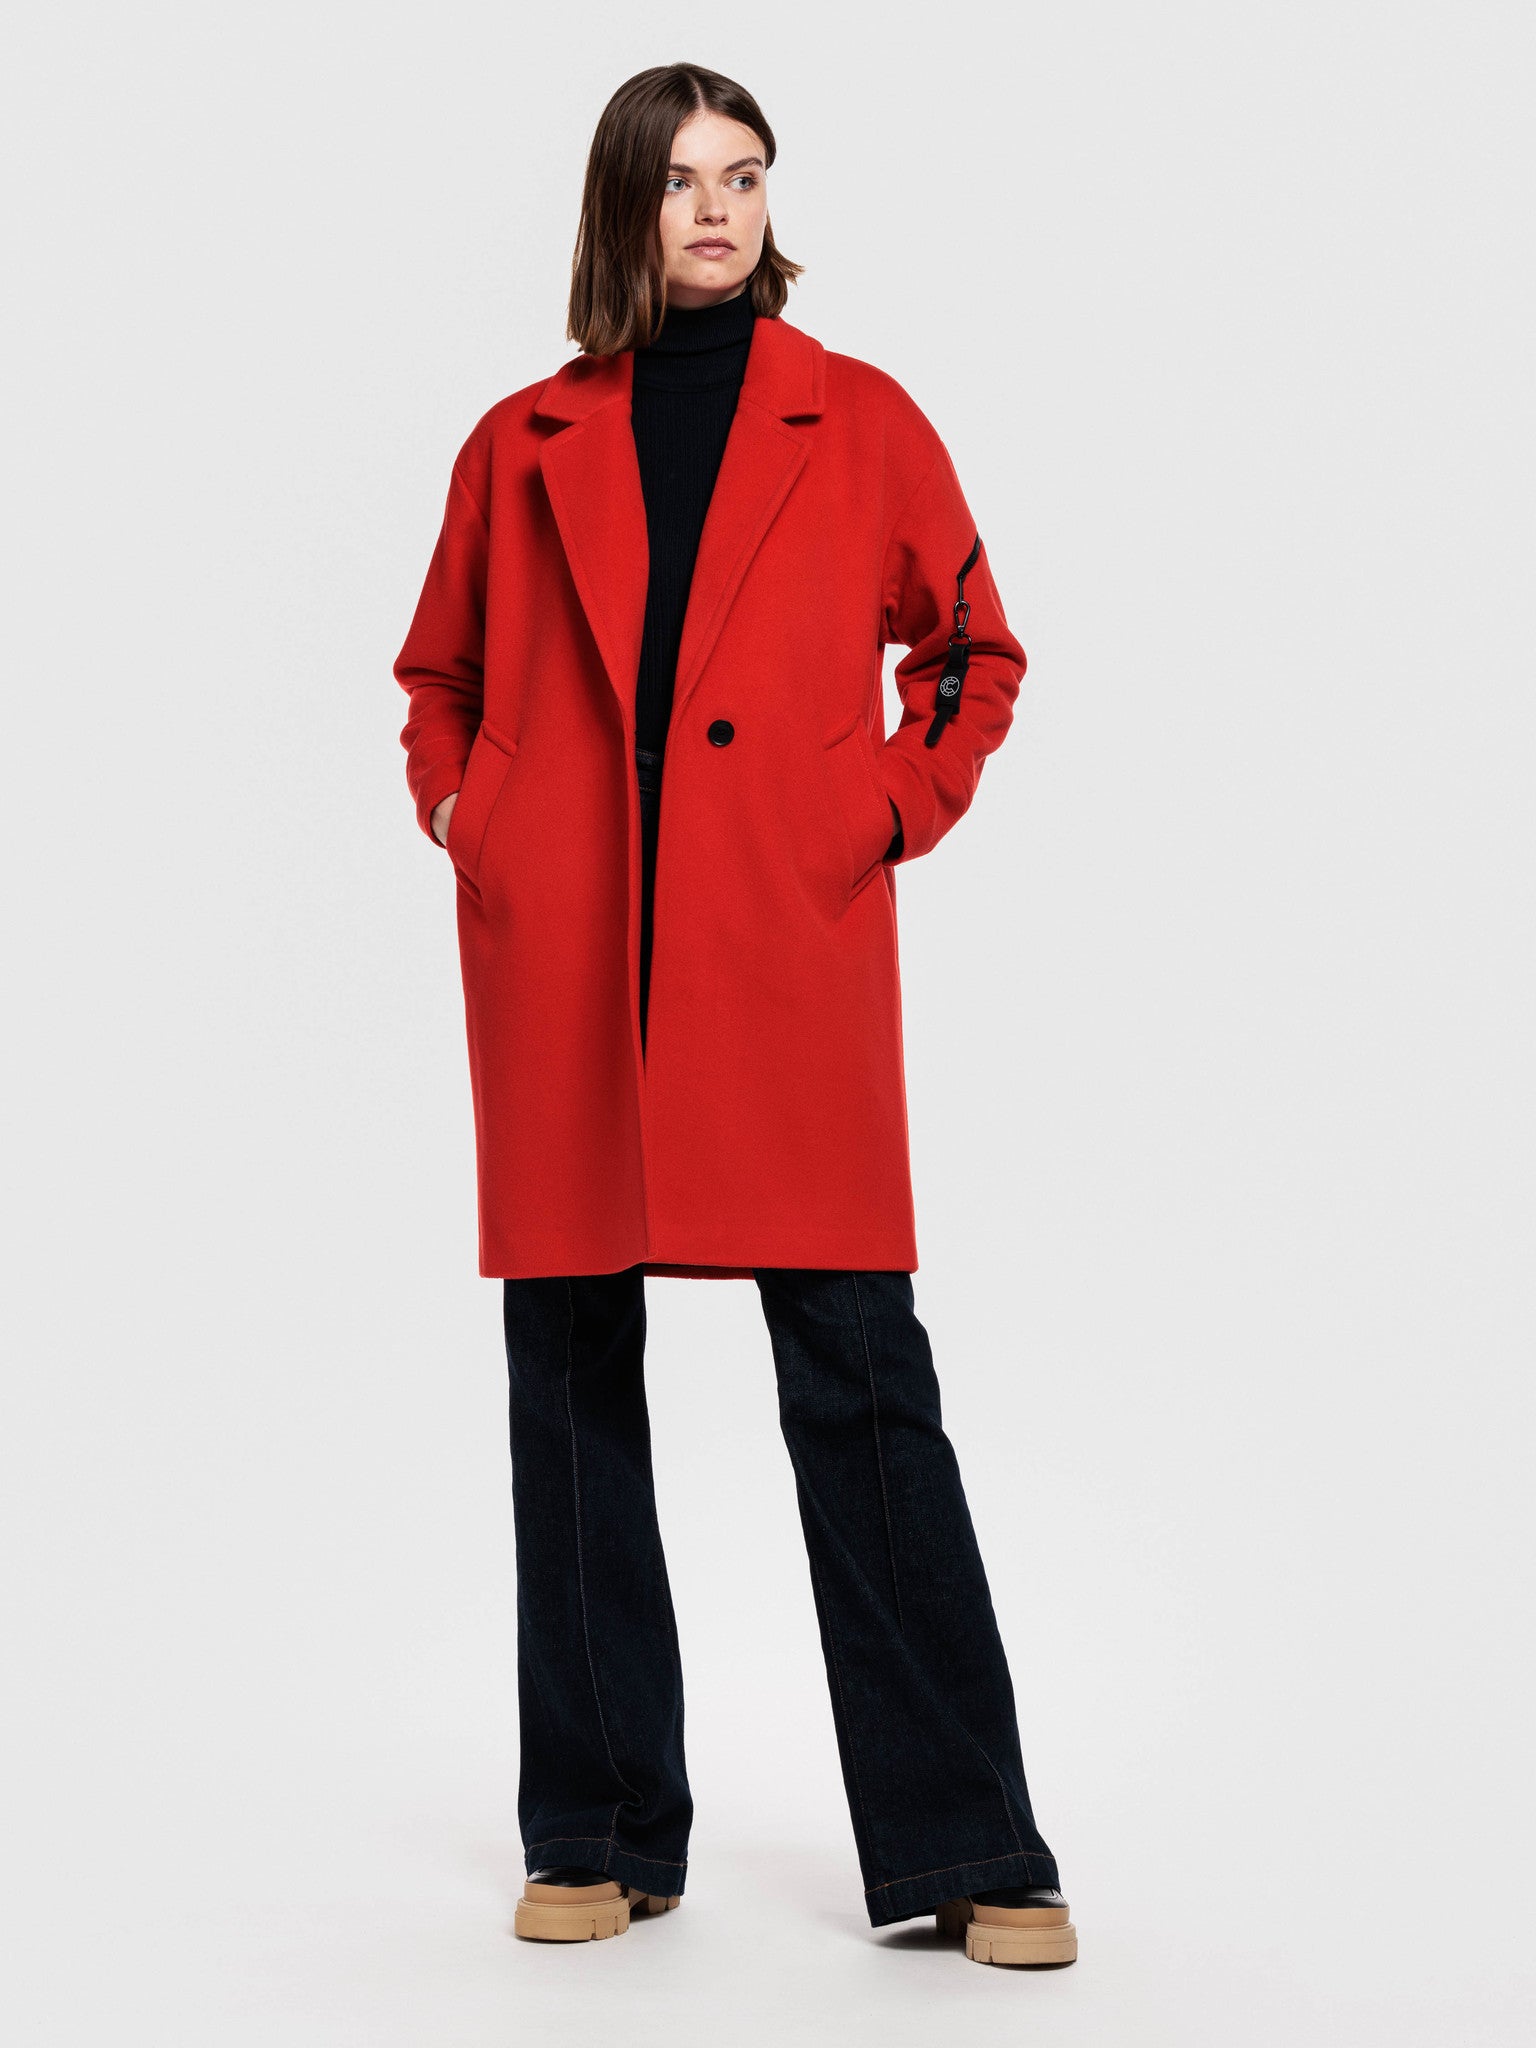 CREENSTONE WOOL CASHMERE COCOON JACKET - LAVA RED